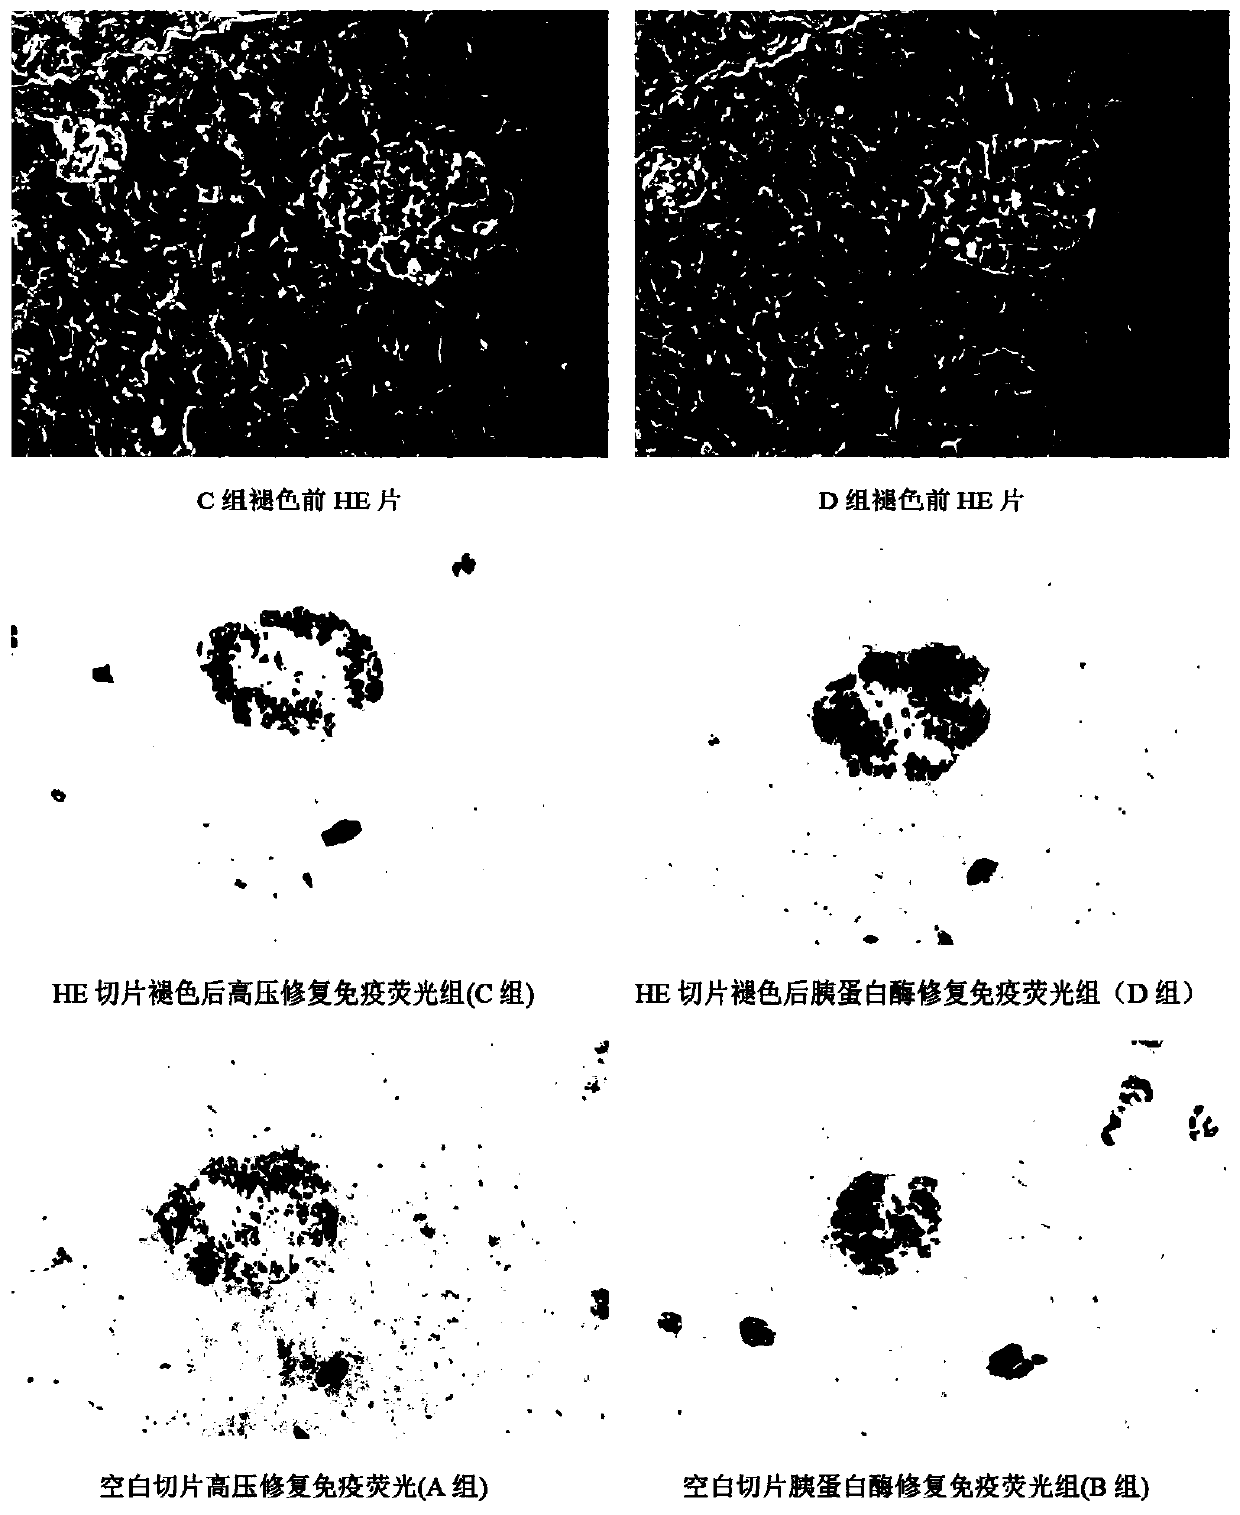 Method for immunofluorescence staining after HE slice fading